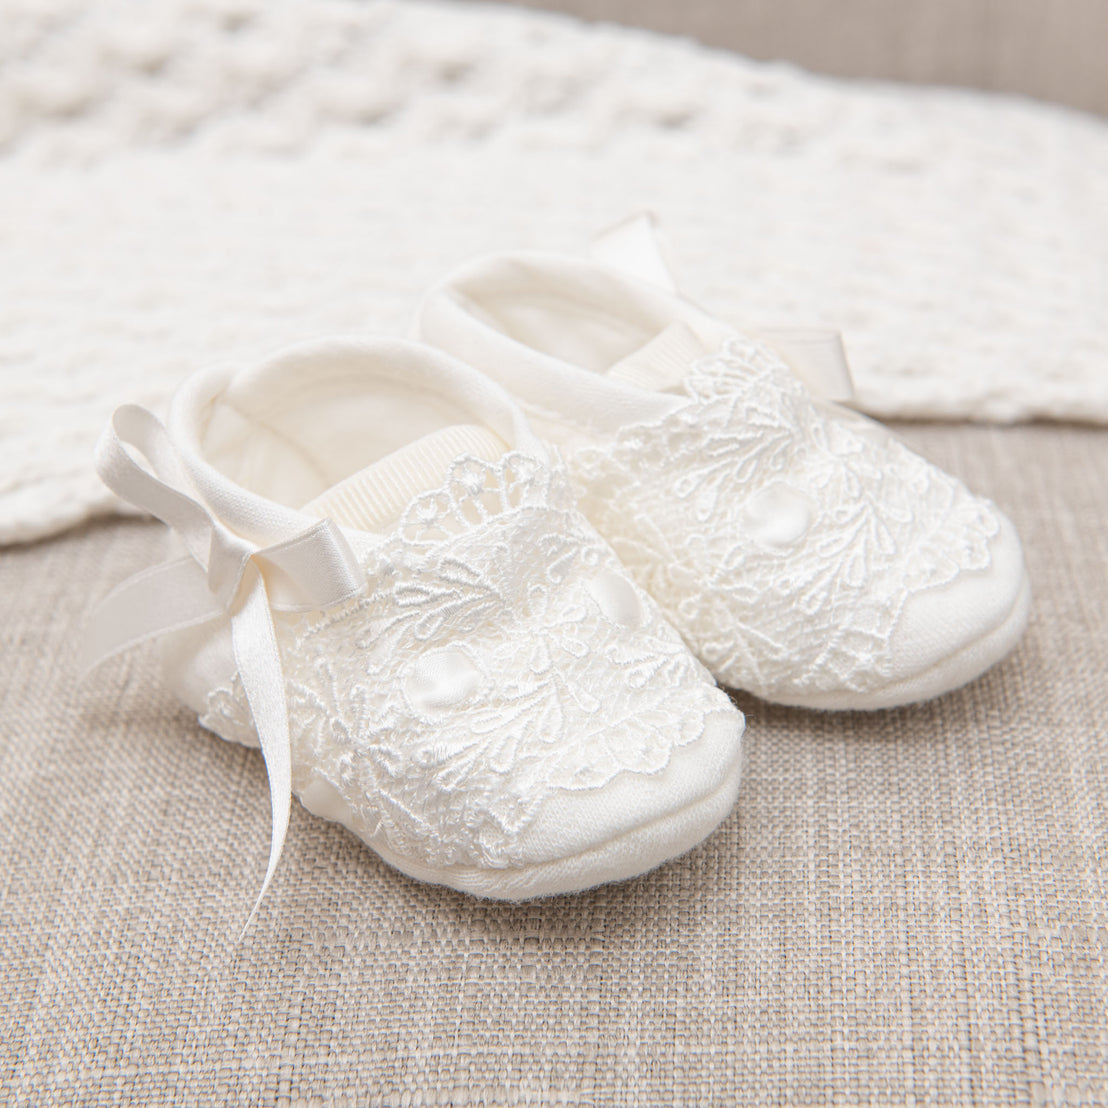 A Madeline Newborn Gift Set with delicate white heirloom baby shoes with lace details and satin ribbons, placed on a soft beige fabric surface. 